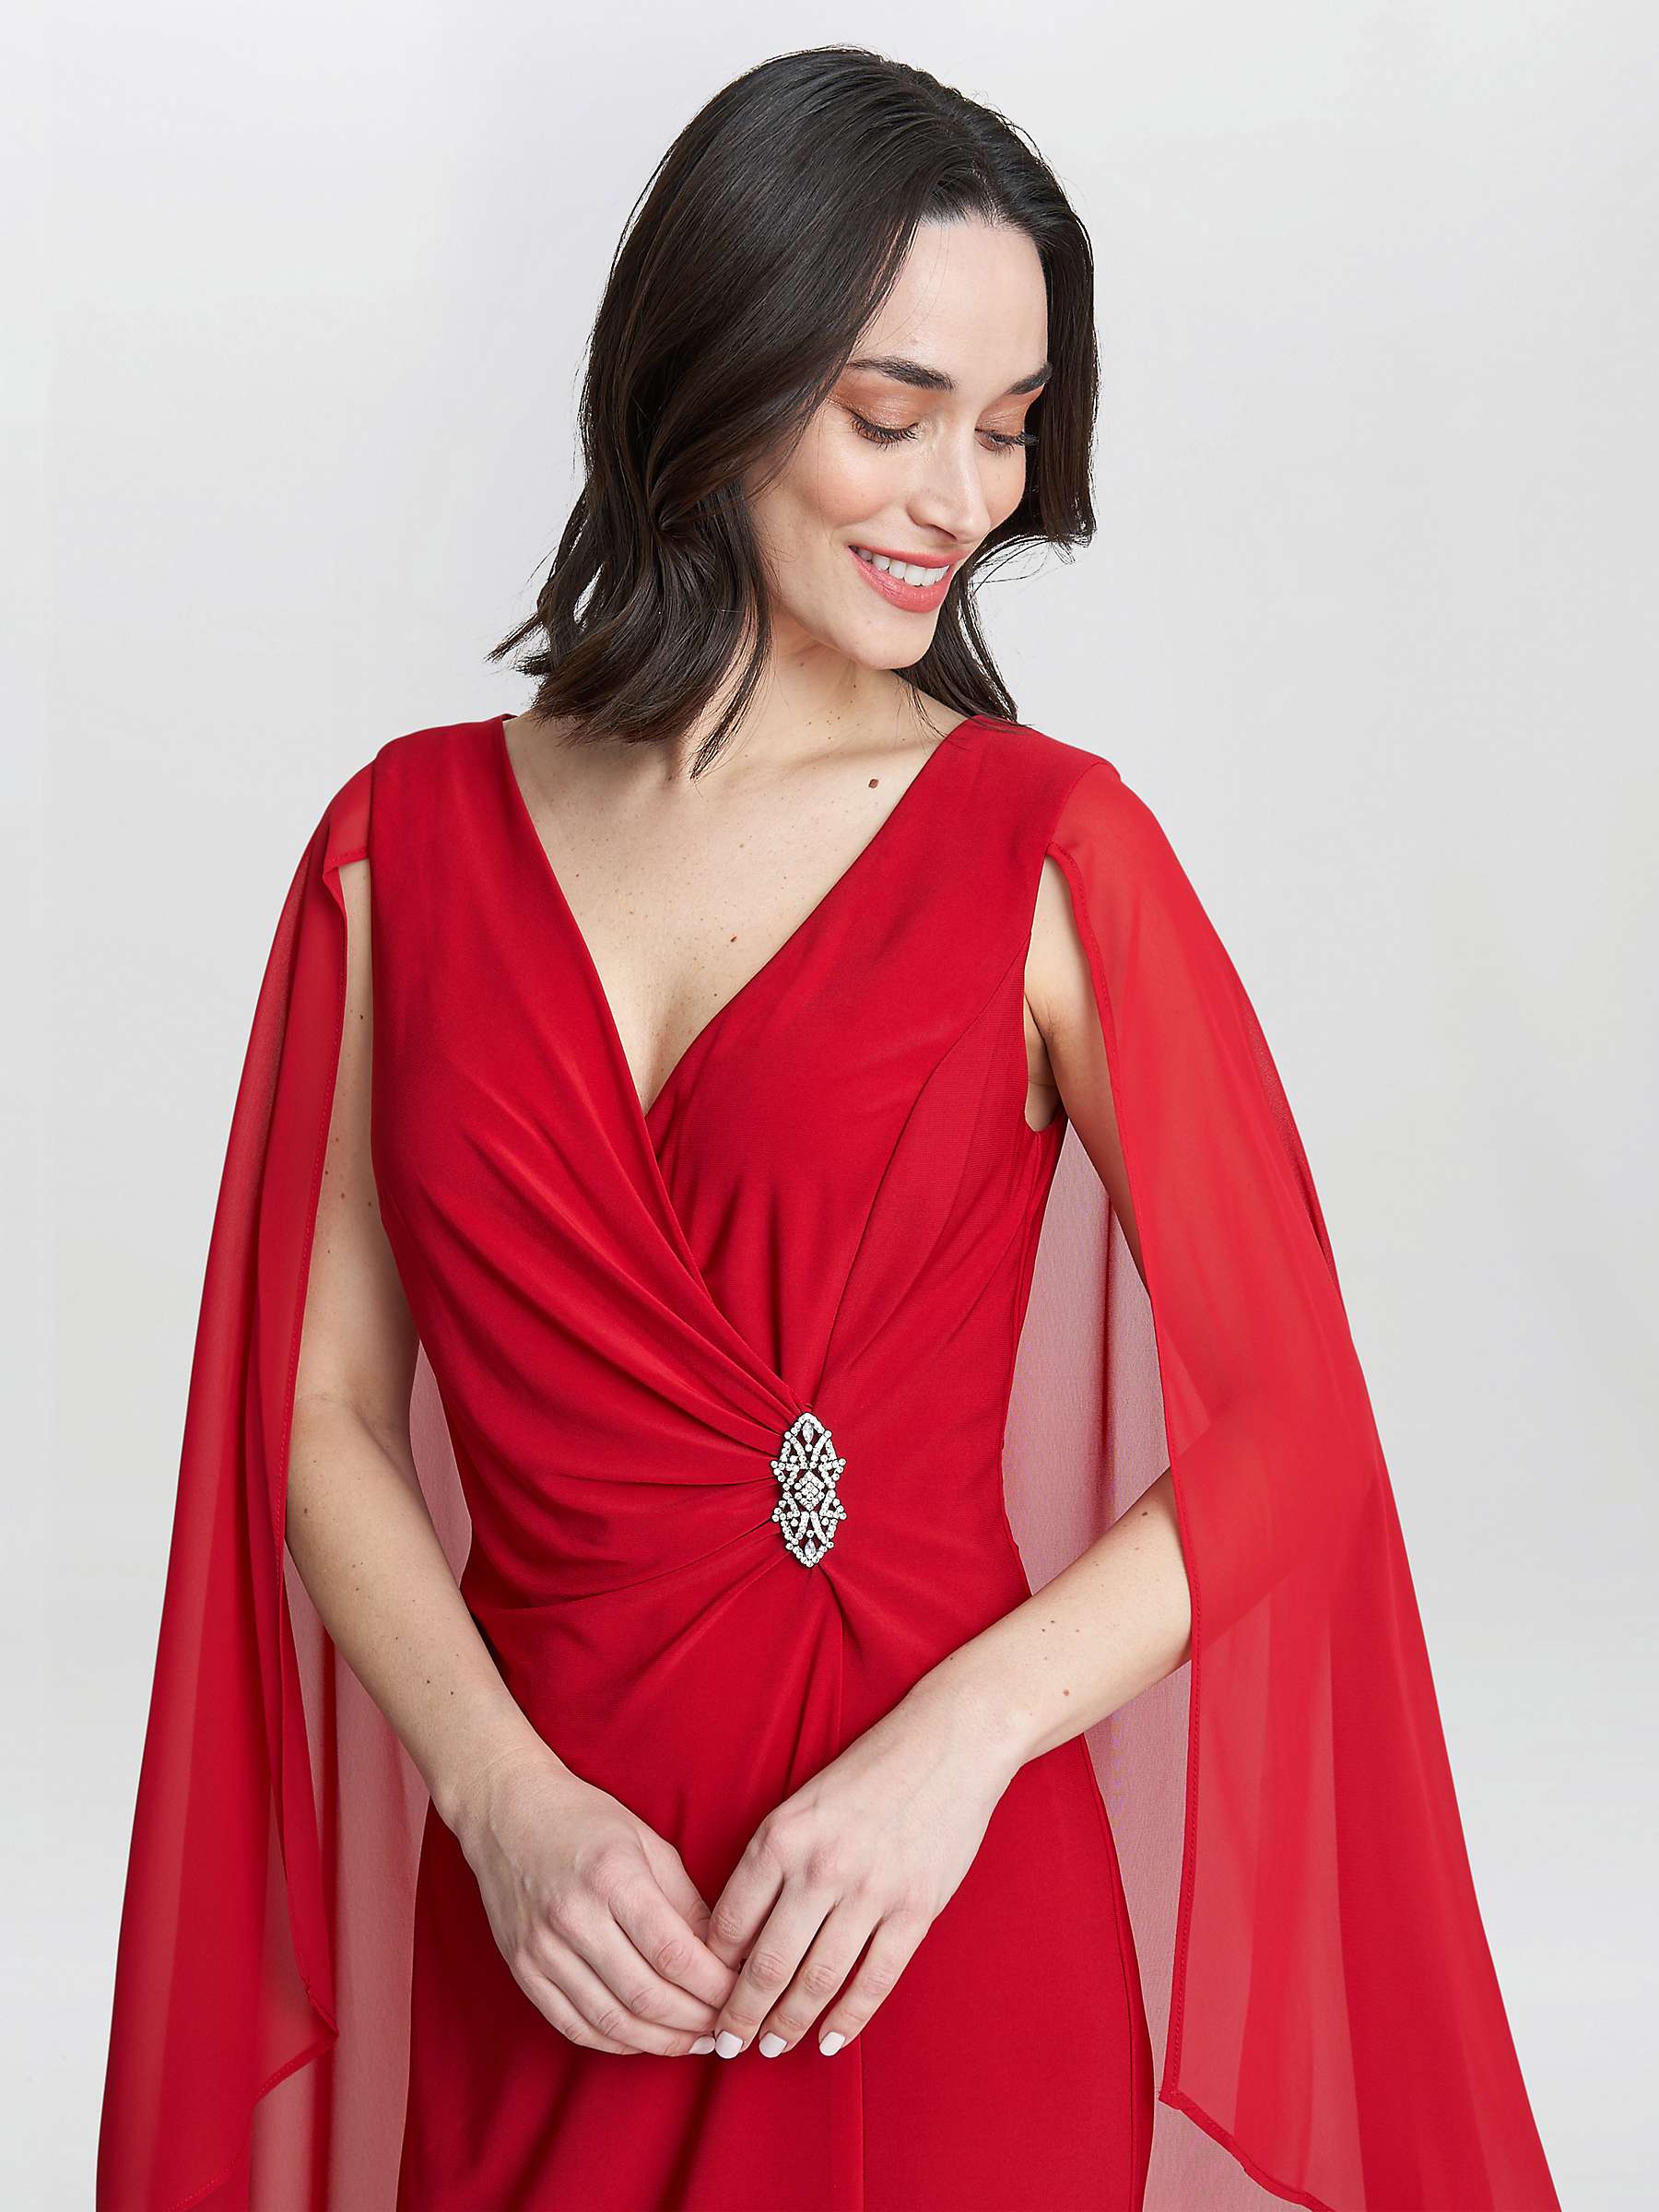 Buy Gina Bacconi Lisa Faux Wrap Jersey Dress with Cape, Red Online at johnlewis.com